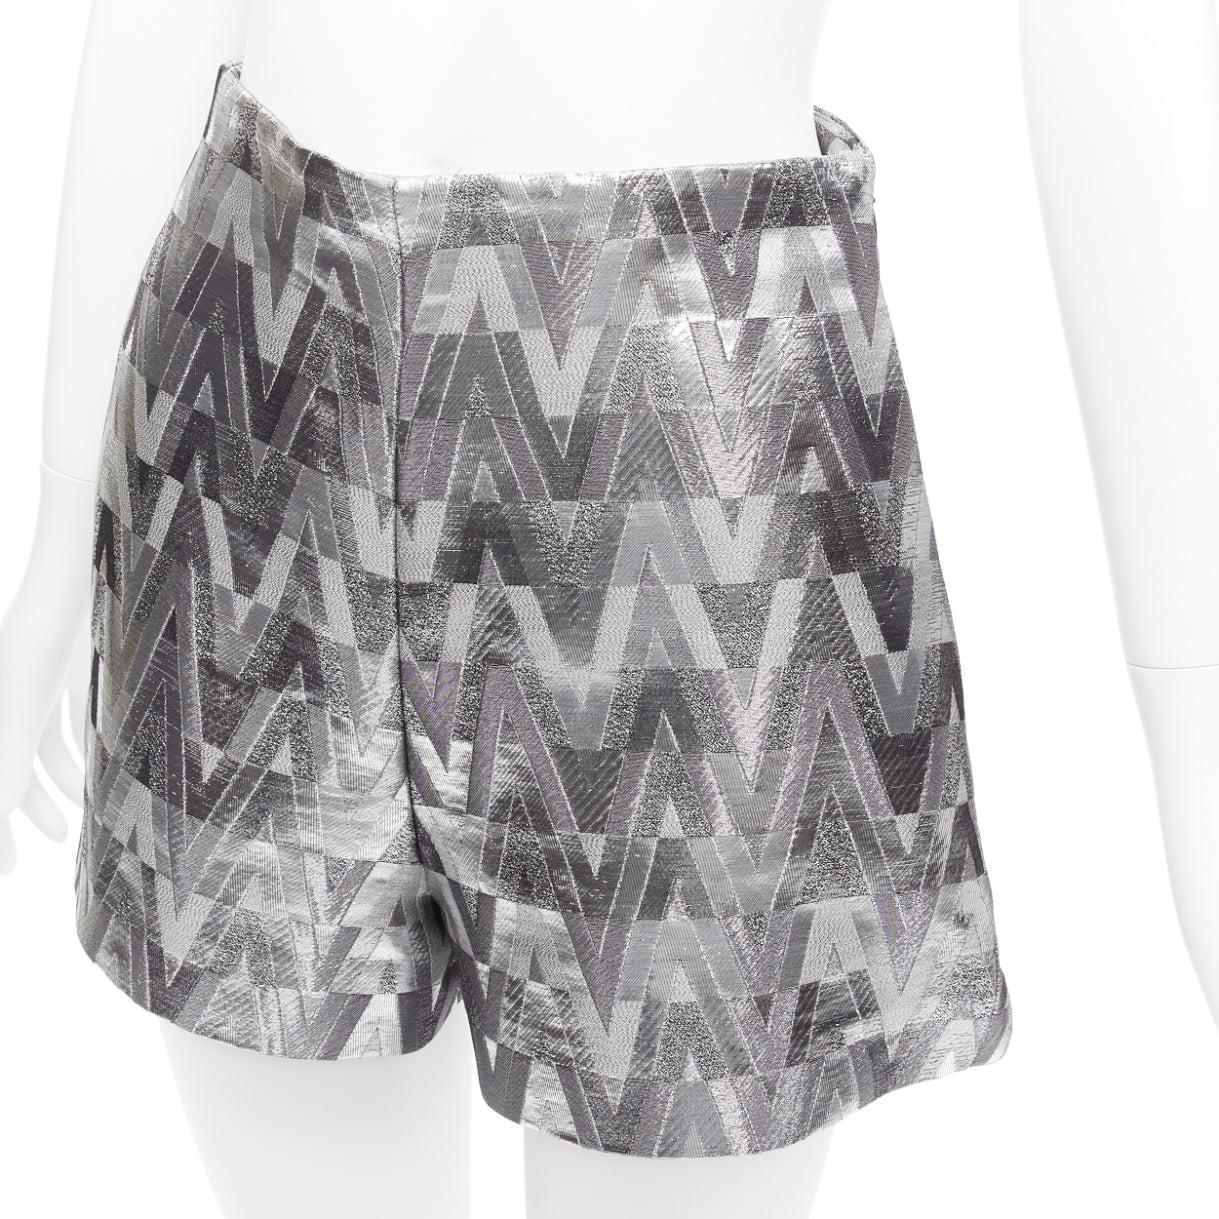 VALENTINO V Optical metallic silver graphic jacquard highwa stied shorts IT38 XS
Reference: AAWC/A00574
Brand: Valentino
Designer: Pier Paolo Piccioli
Collection: V Optical
Material: Viscose, Blend
Color: Silver
Pattern: Graphic
Closure: Zip
Lining: